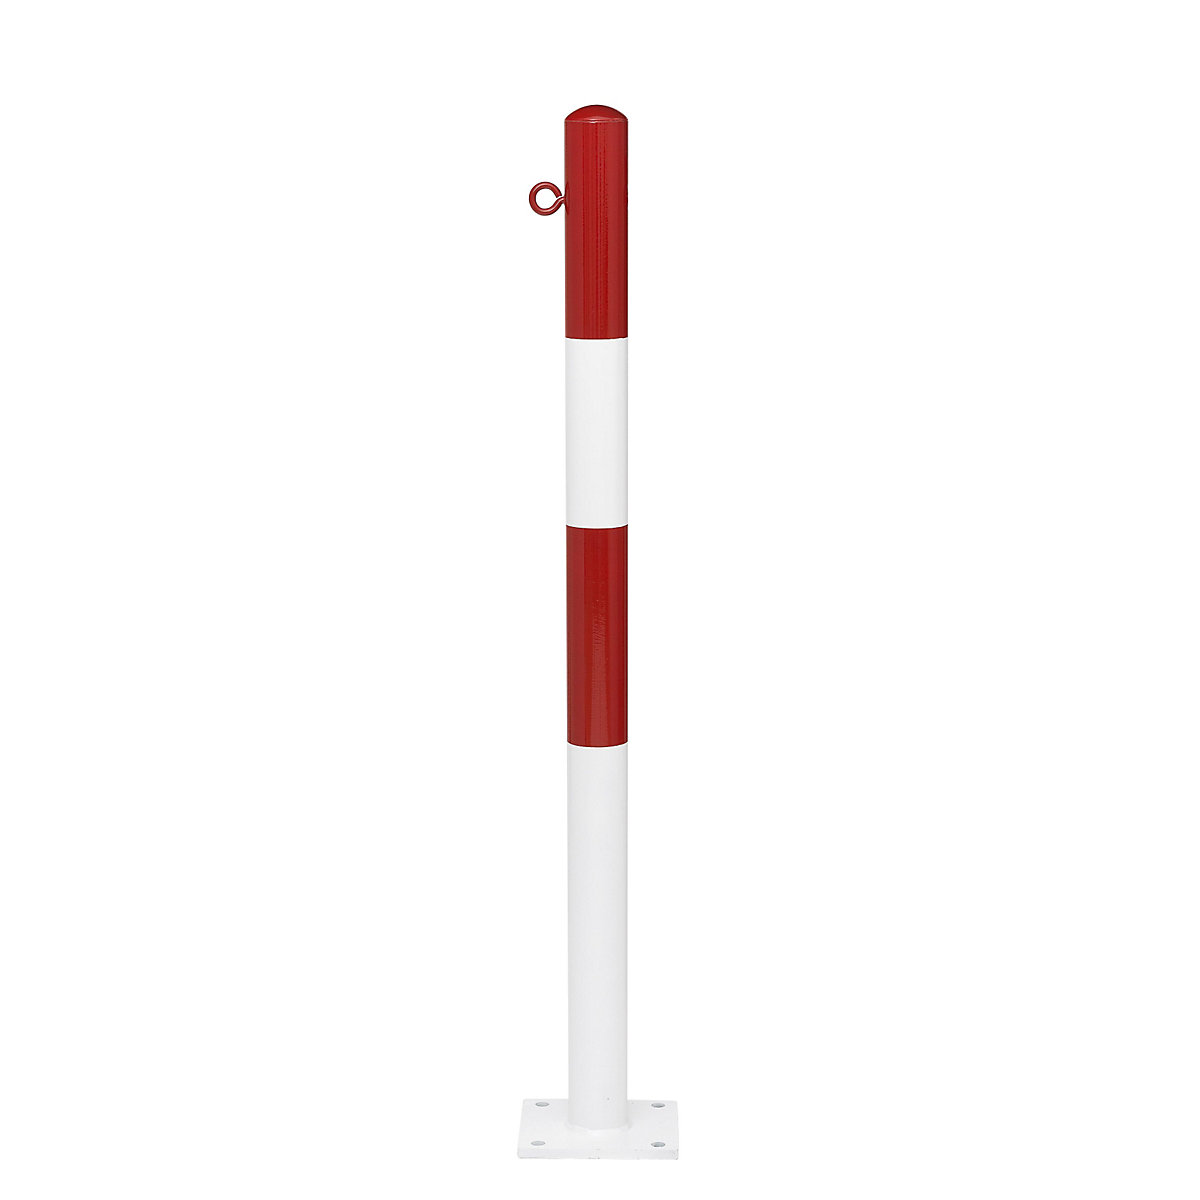 Barrier post, for bolting in place, Ø 76 mm, red/white plastic coated, 1 eyelet-5